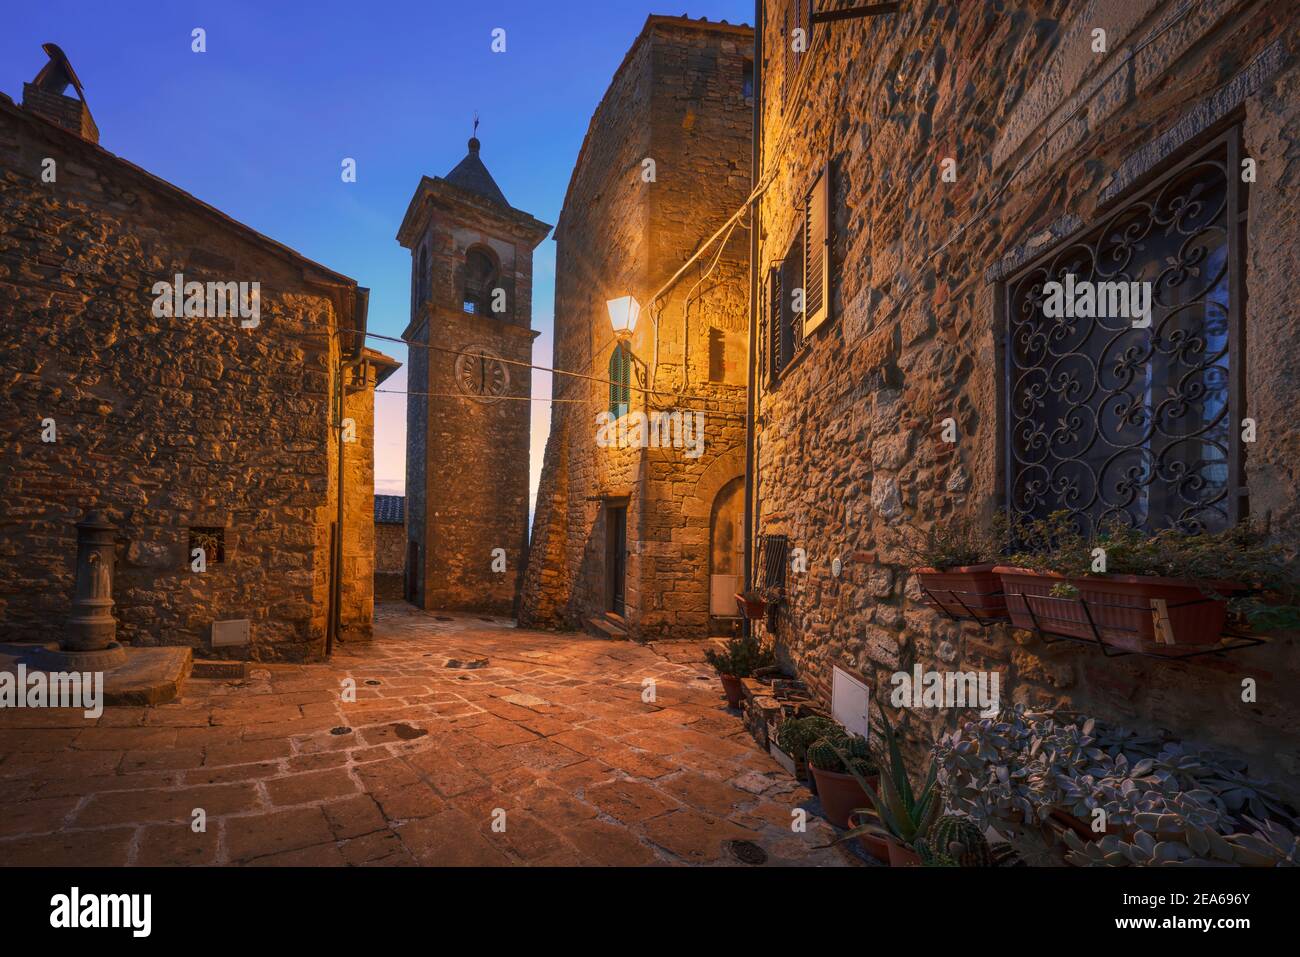 Casale Marittimo old village in Maremma at sunset. Picturesque flowery square and campanile tower. Tuscany, Italy Europe. Stock Photo